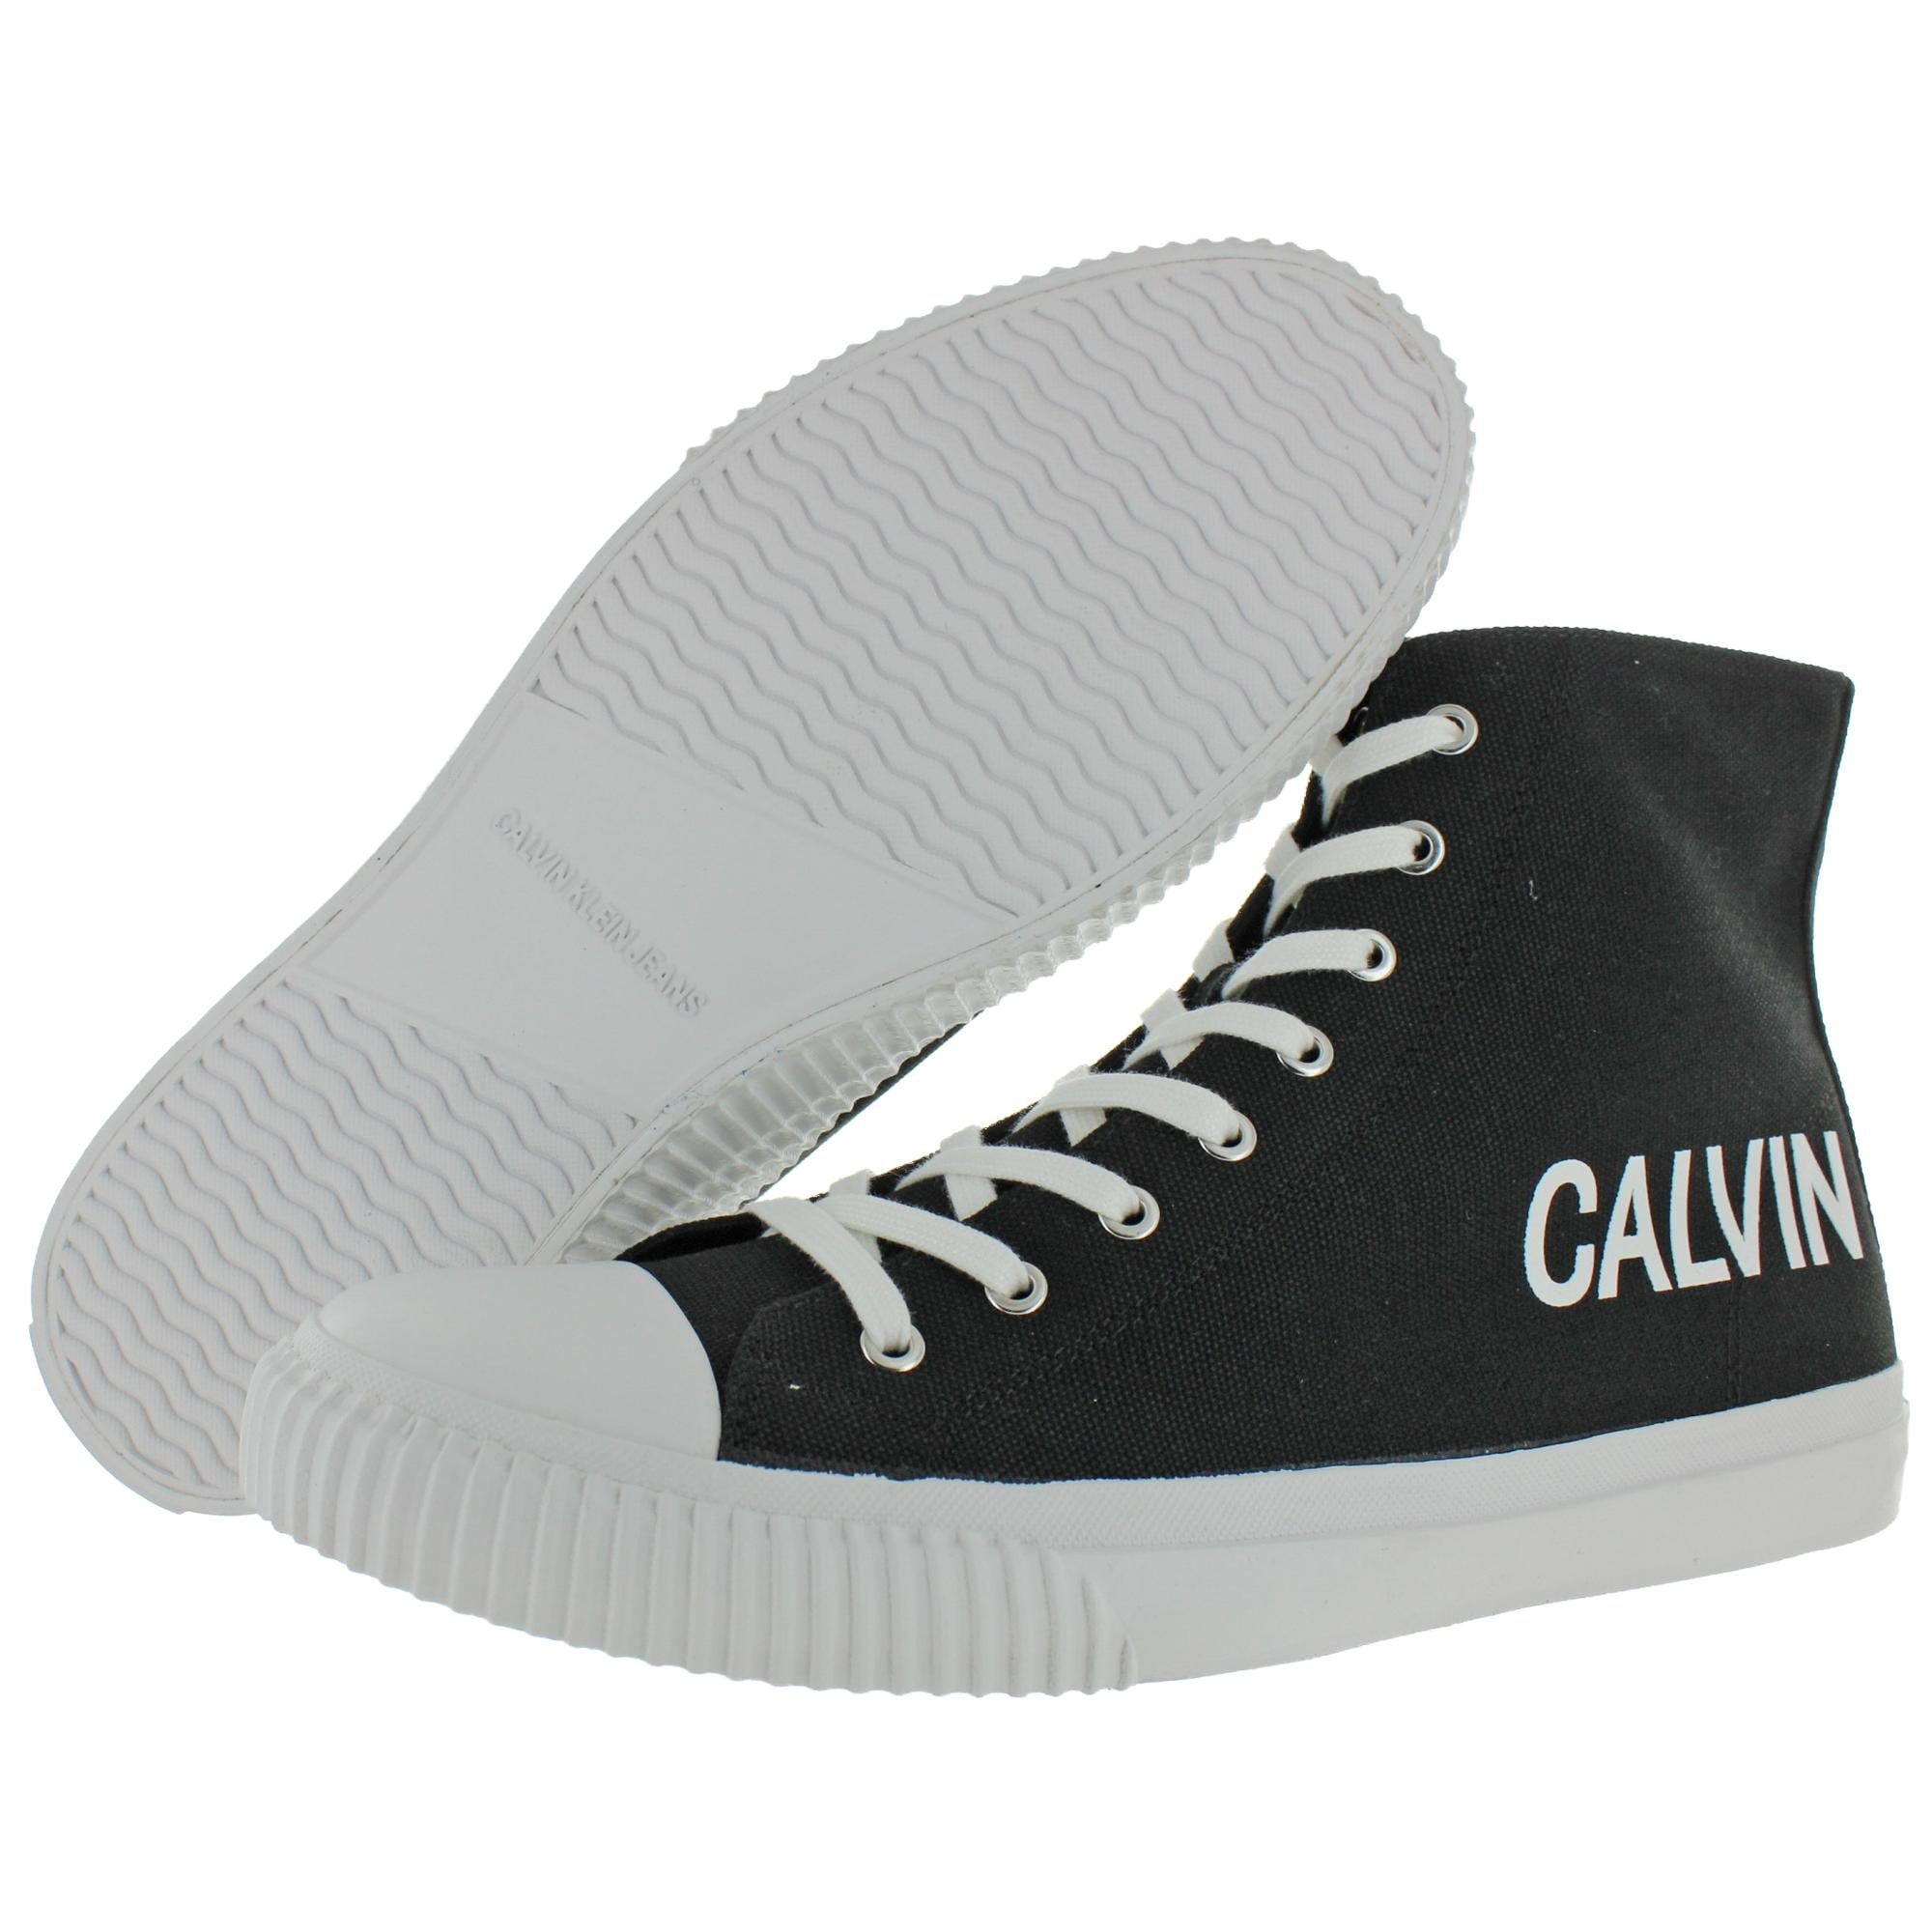 mens canvas high top sneakers